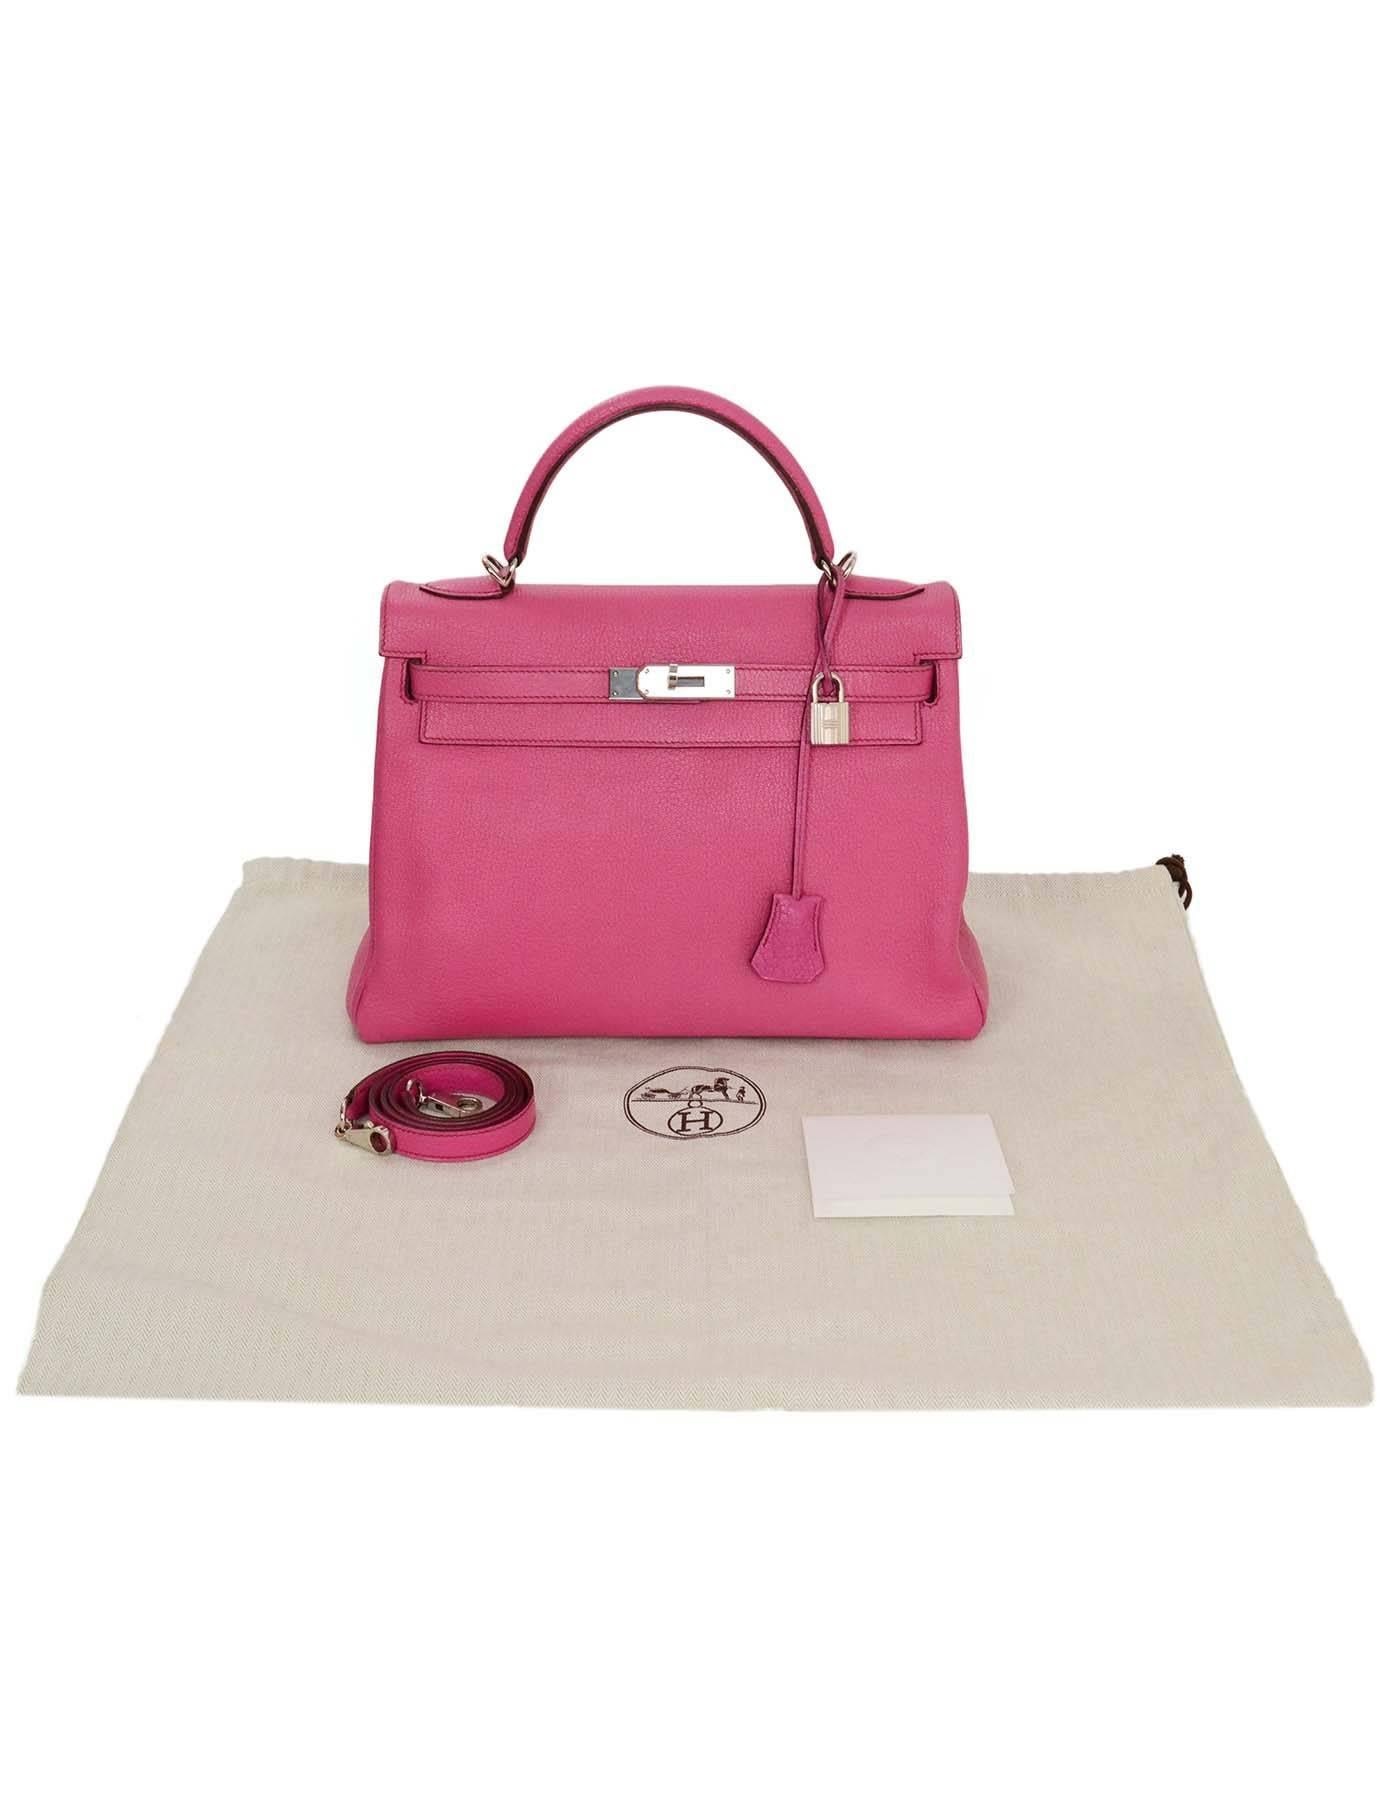 Hermes RARE Hot Pink Rose Tyrien Chevre Leather 32cm Kelly Bag with Strap PHW 3